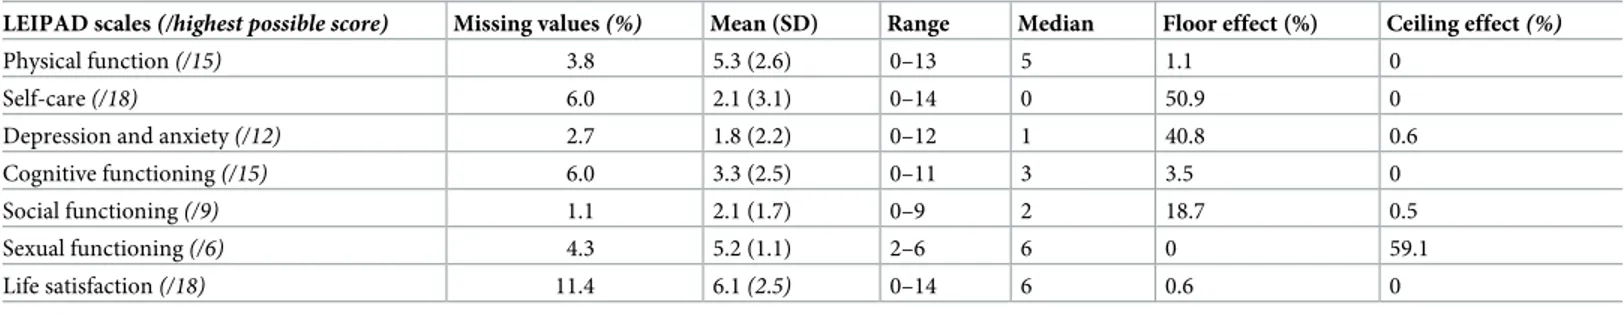 Table 2. Descriptive statistics and score distributions of the LEIPAD scales (n = 184).